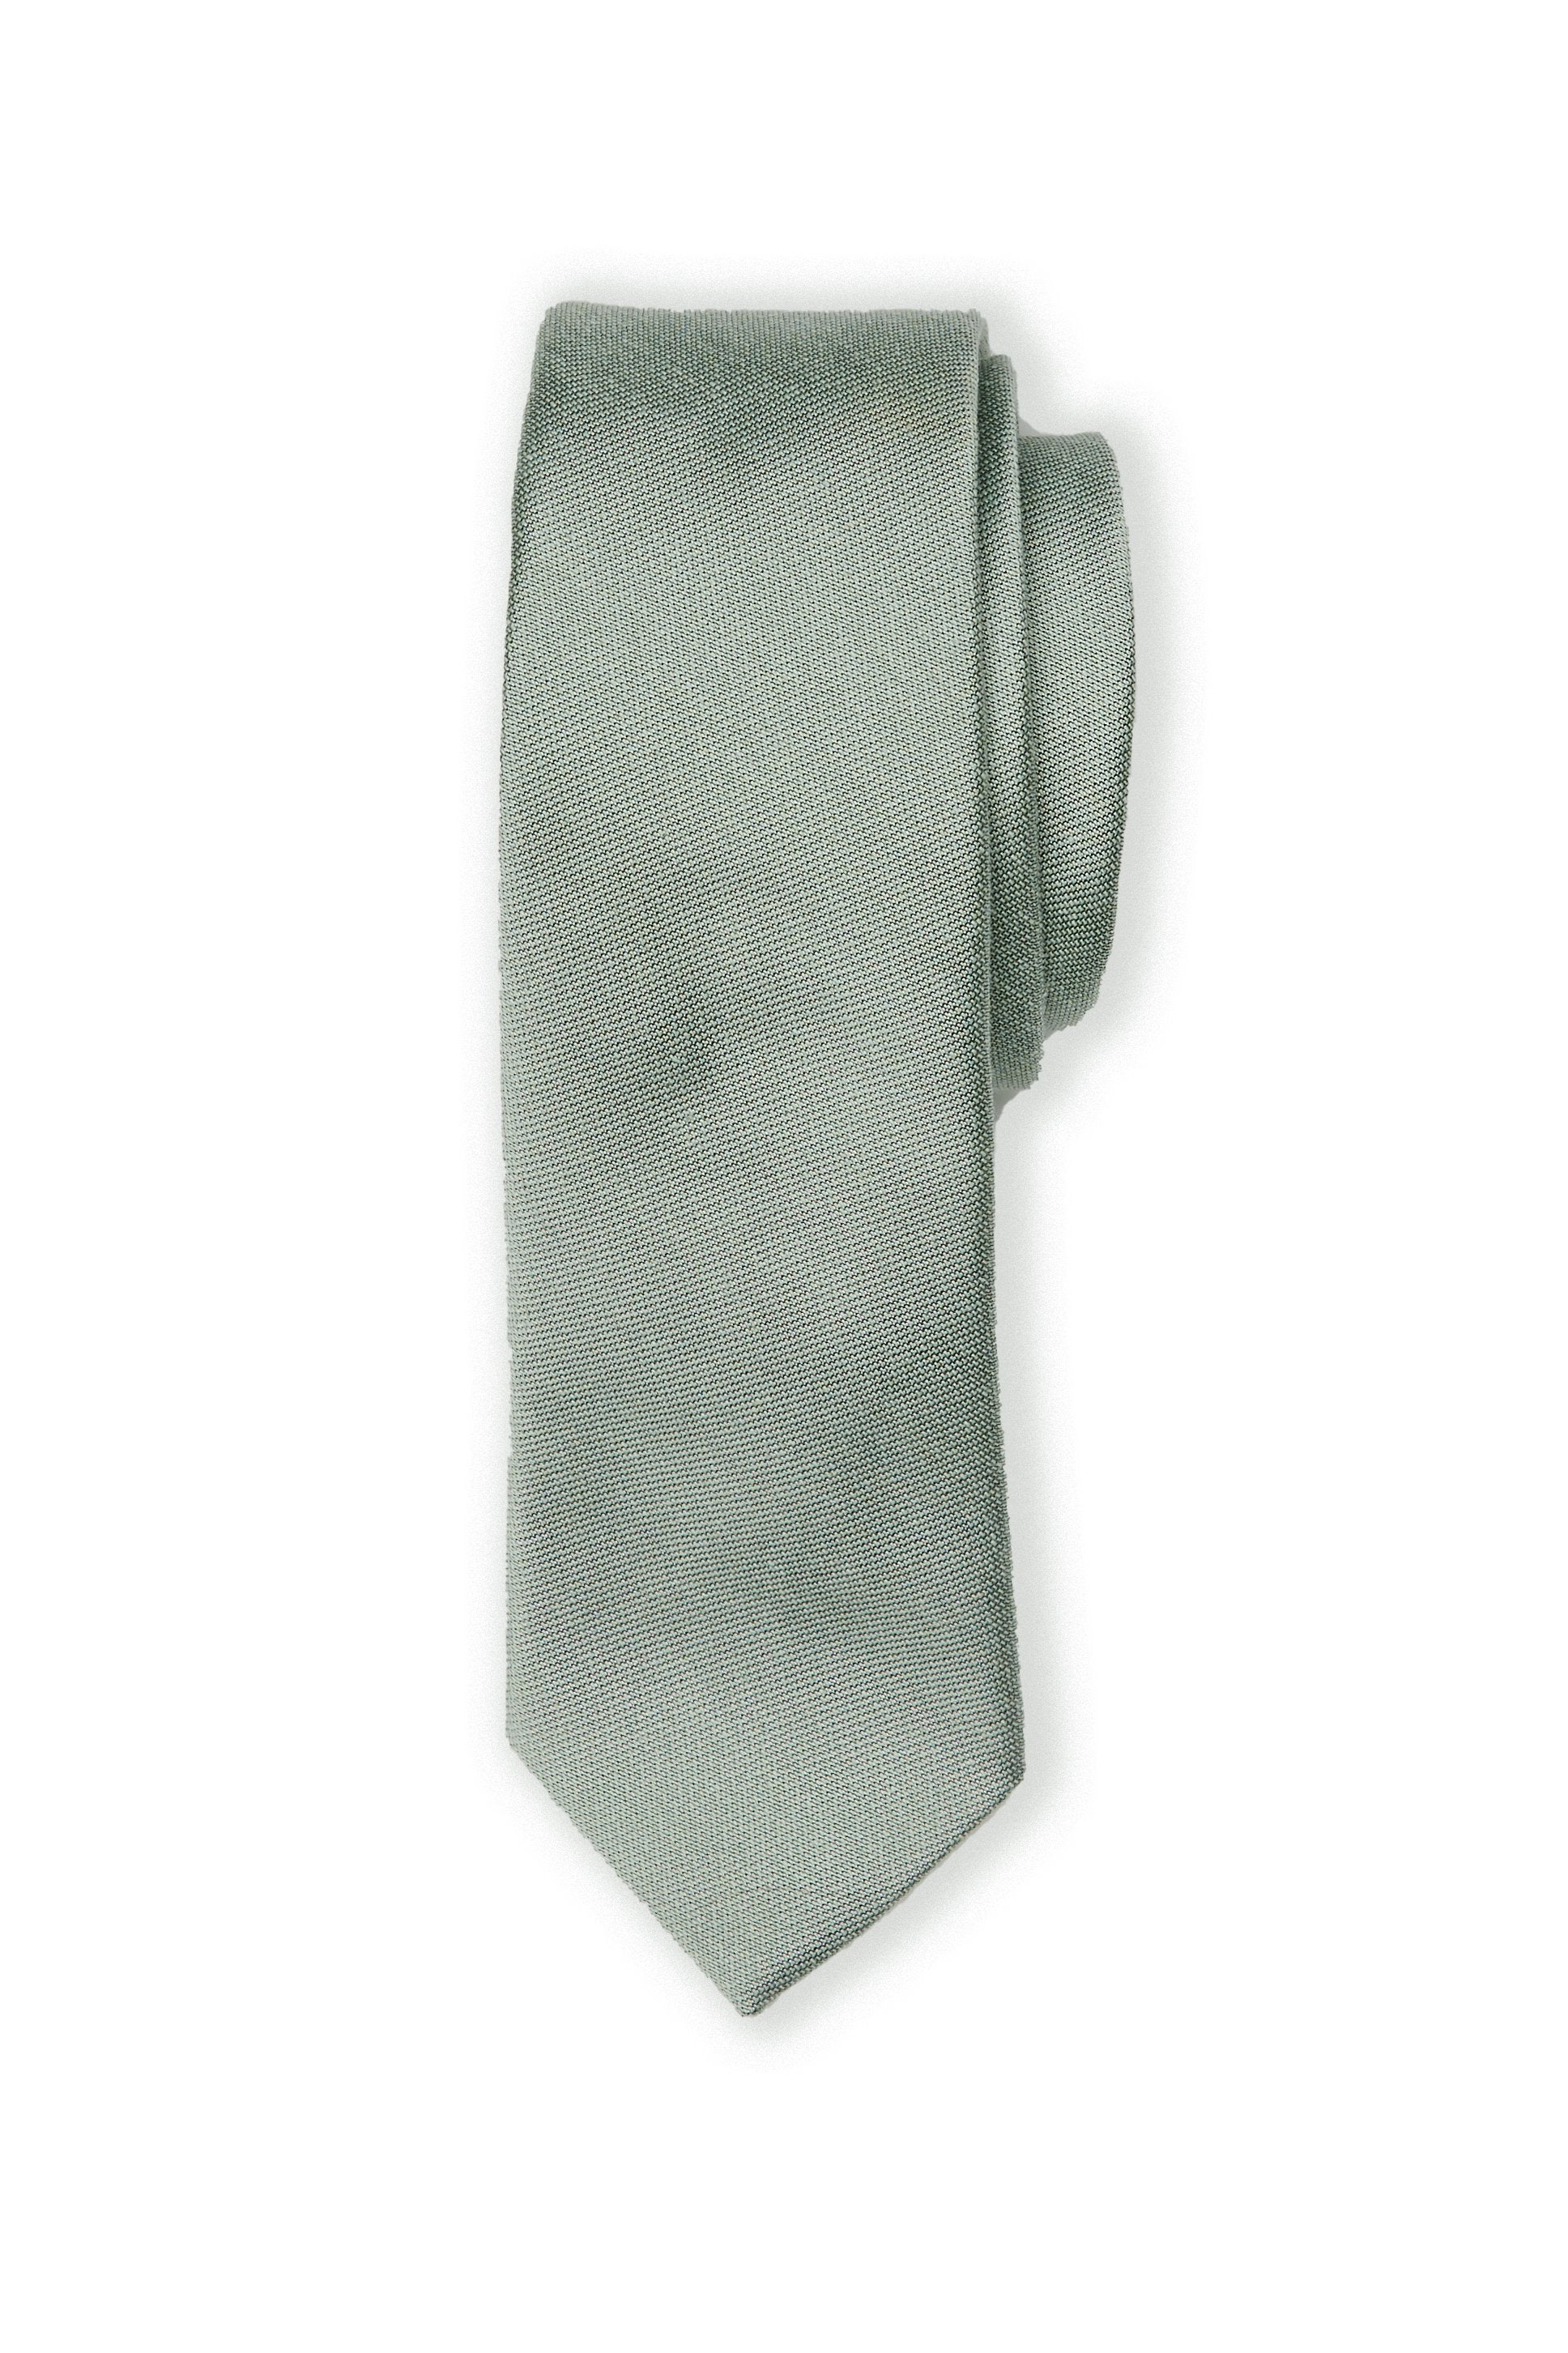 Front closeup view of the Simon Necktie in sage rolled up with the pointed necktie end extended showing the material texture and sheen.